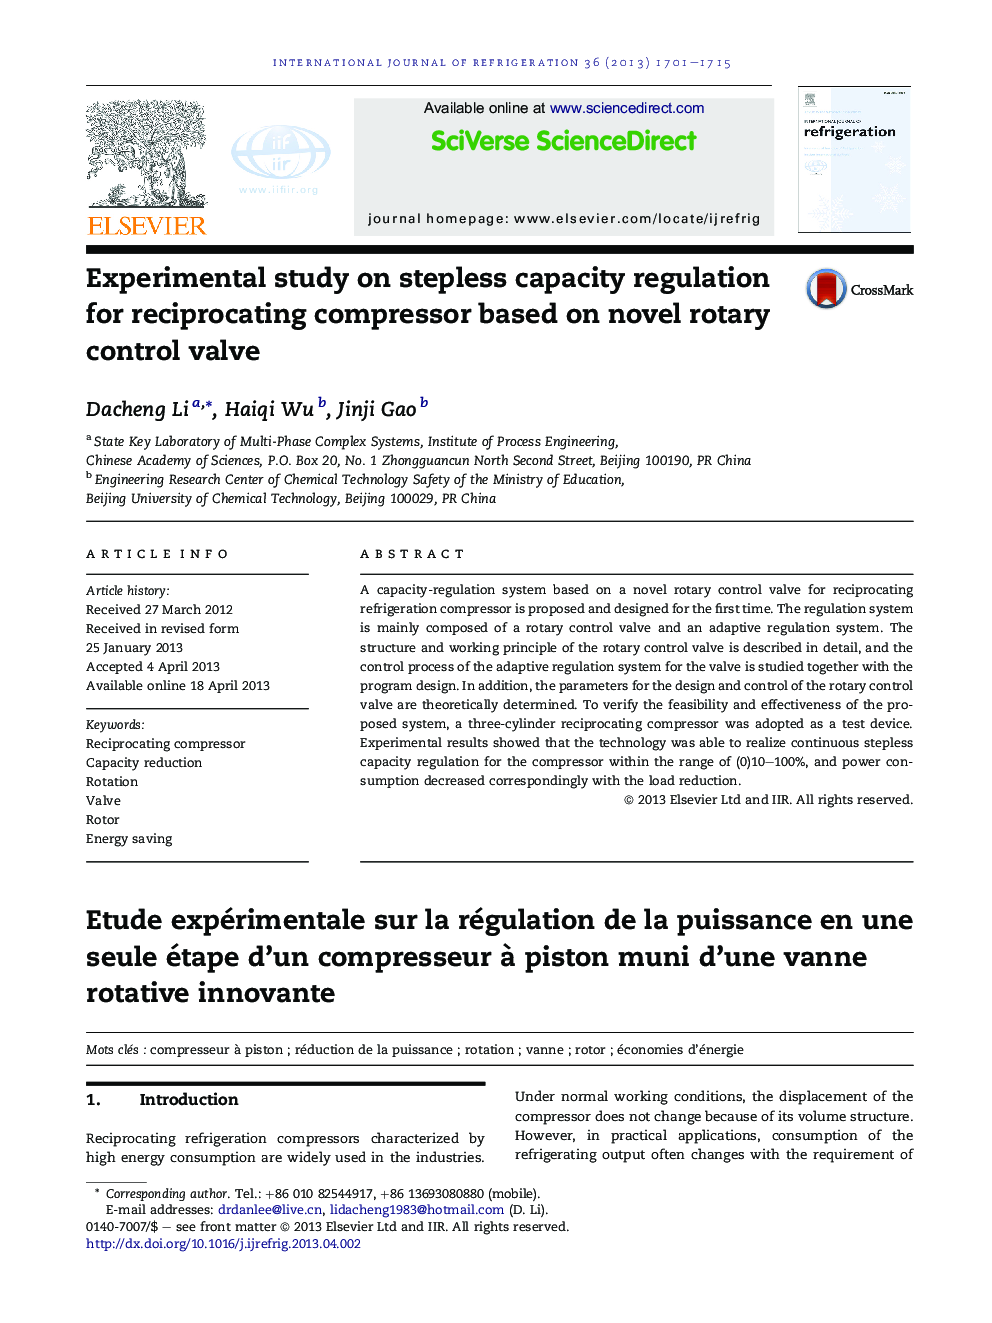 Experimental study on stepless capacity regulation for reciprocating compressor based on novel rotary control valve